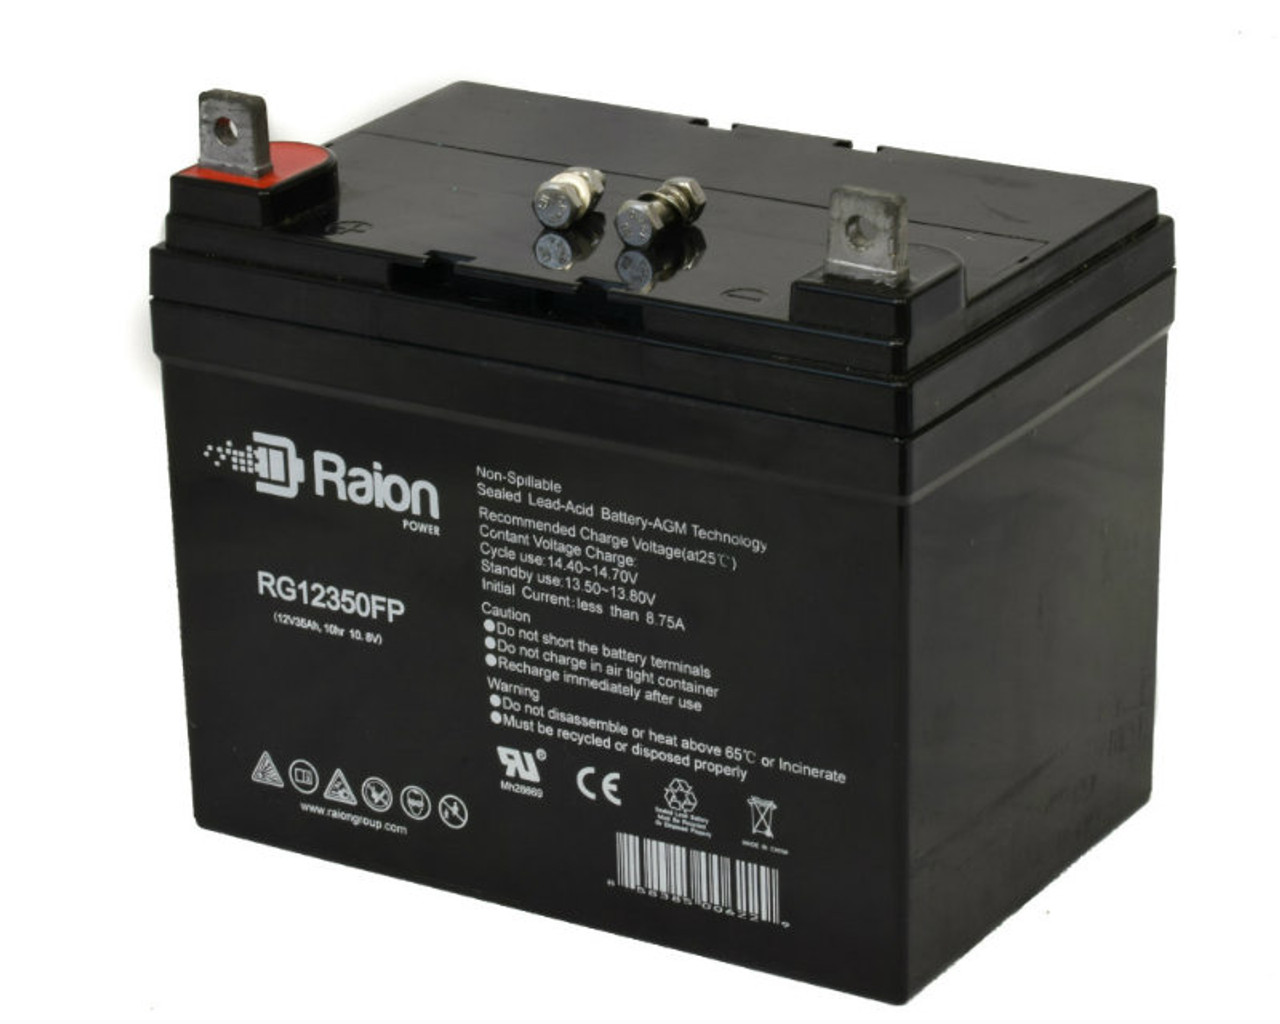 Raion Power Replacement 12V 35Ah RG12350FP Battery for Ingersol Equipment 648